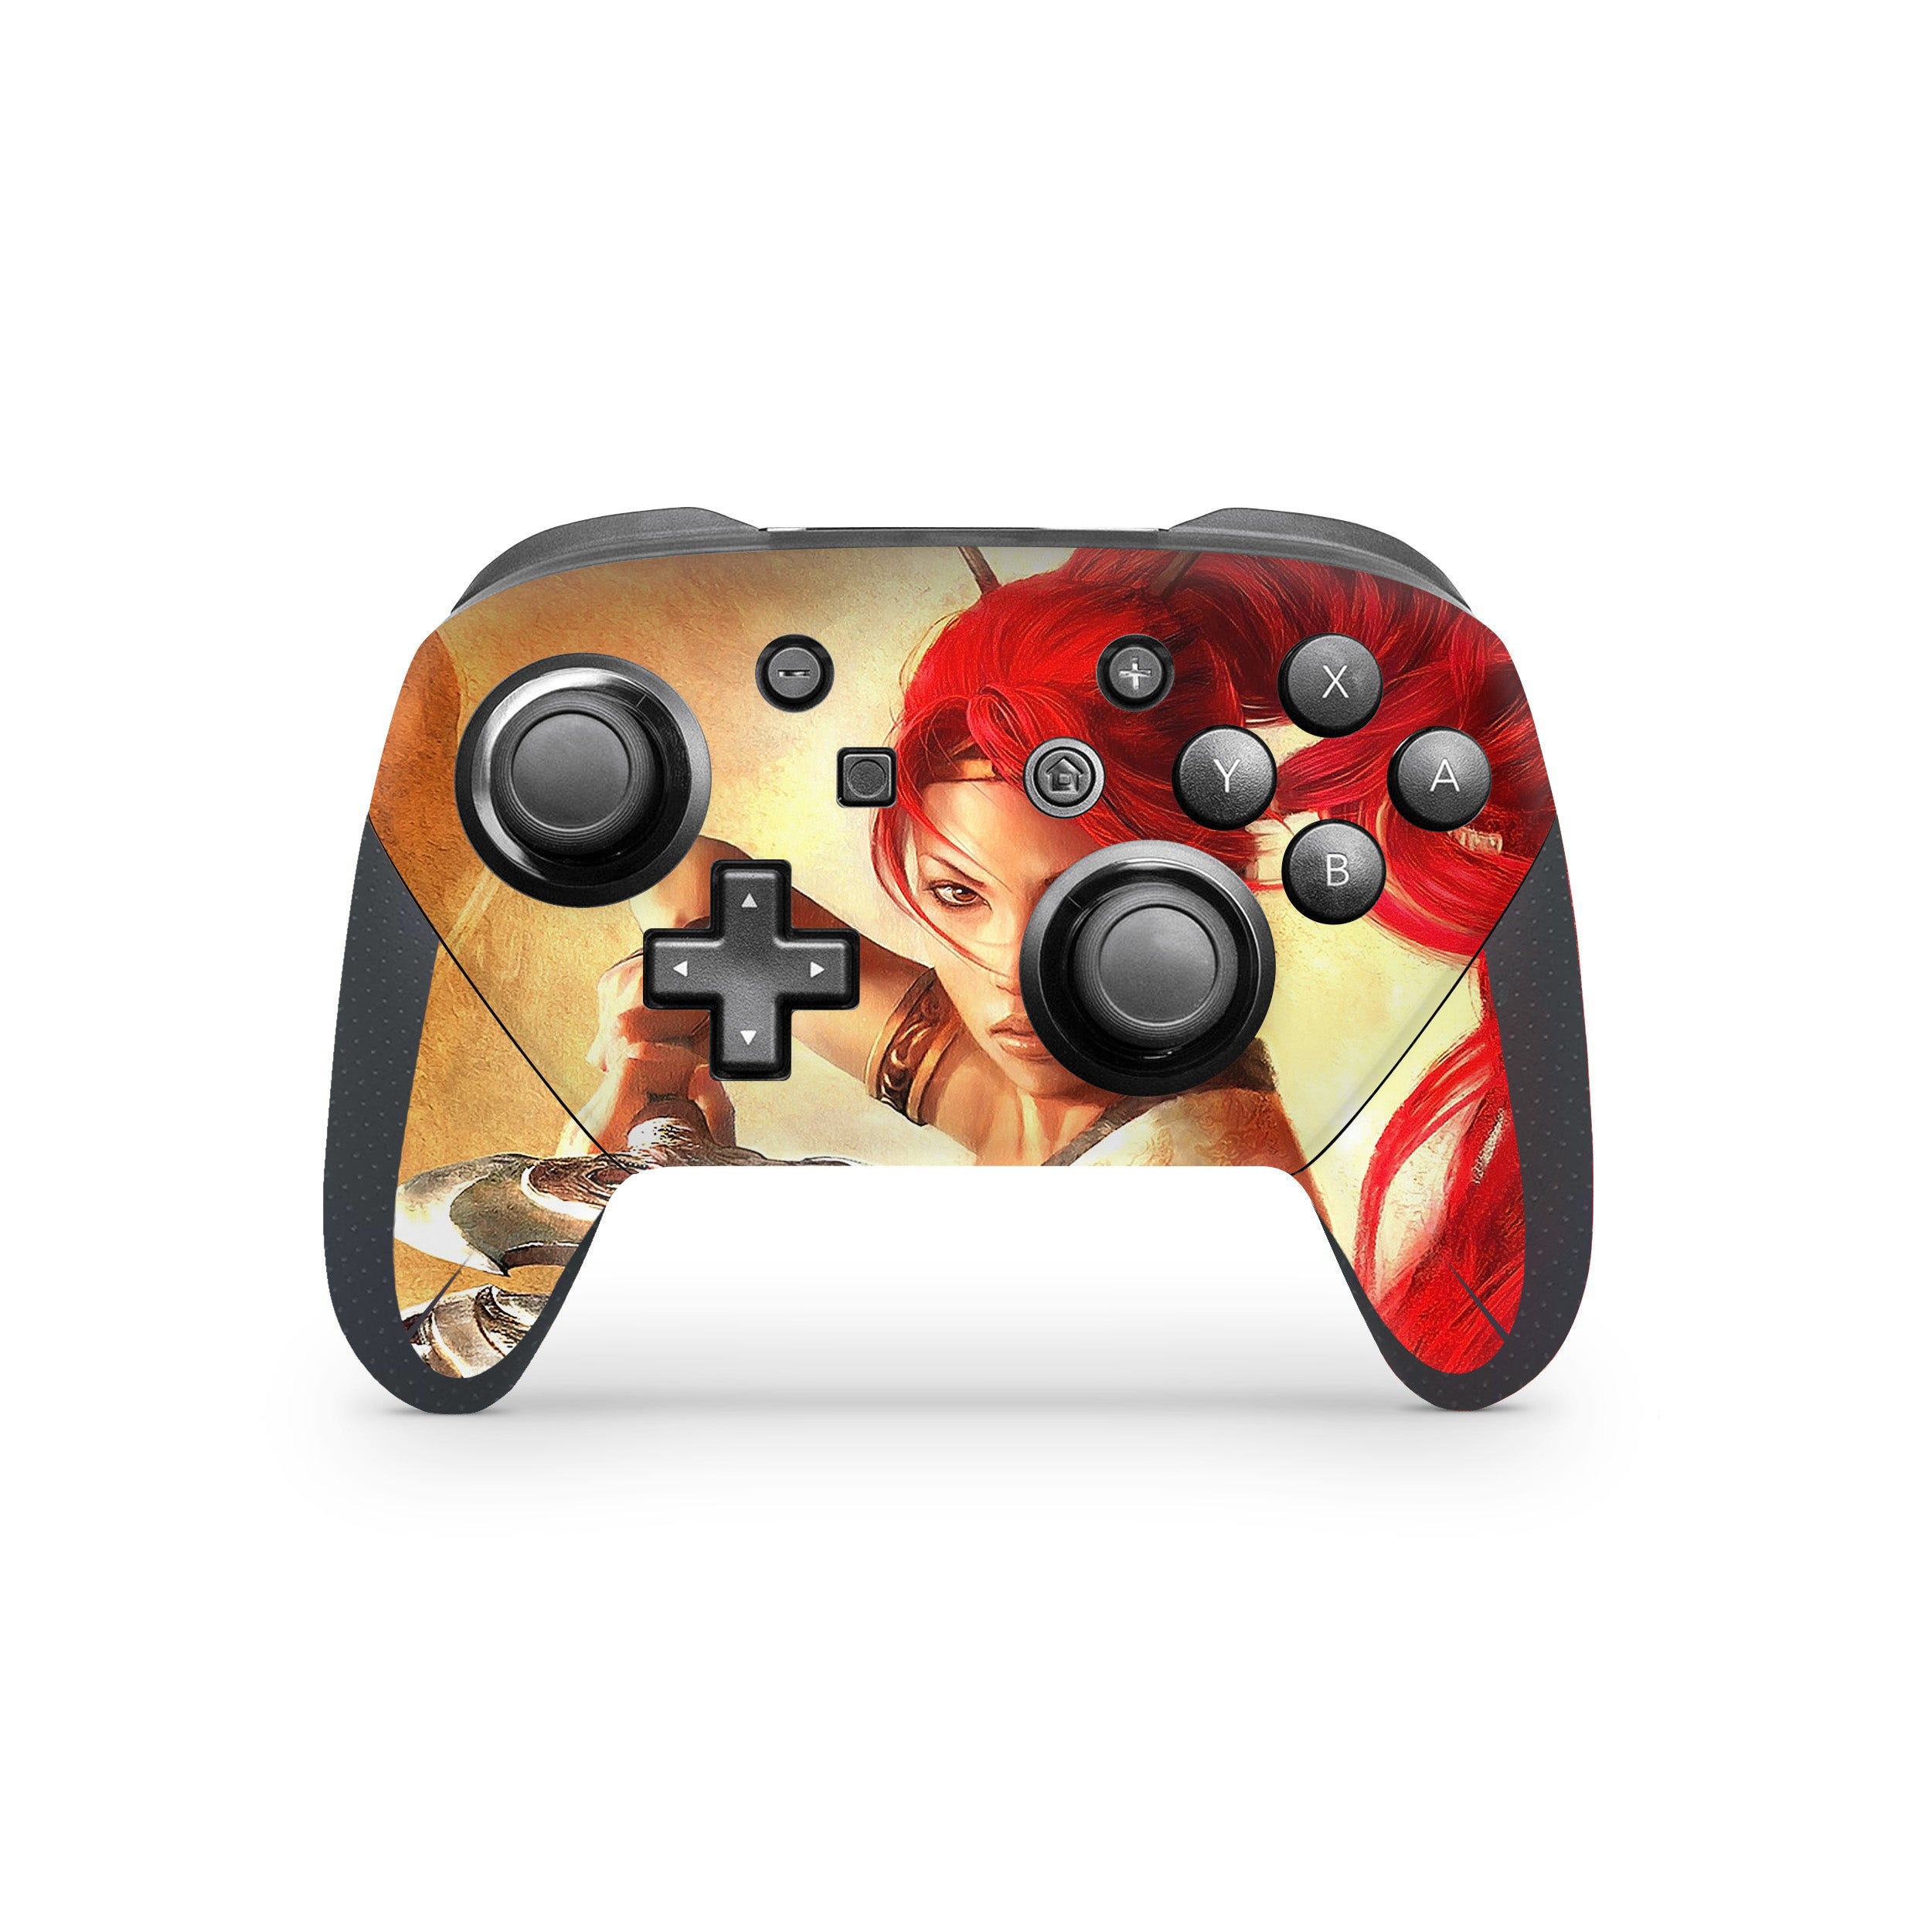 A video game skin featuring a Heavenly Sword design for the Switch Pro Controller.